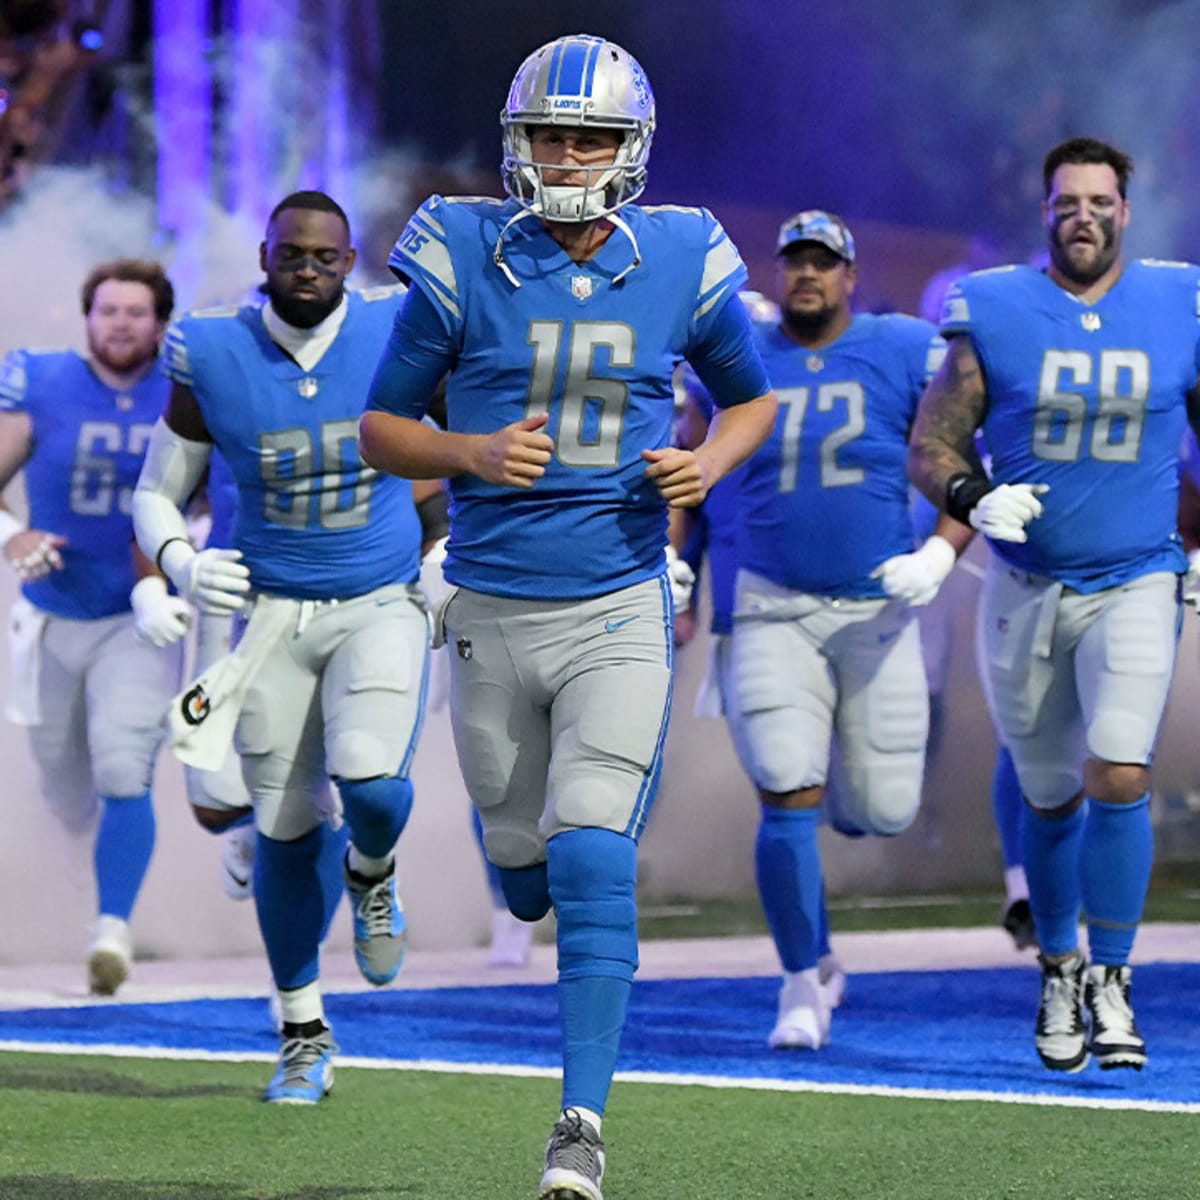 Lions Ticket Sale News Shows Just How Intense the Hype in Detroit